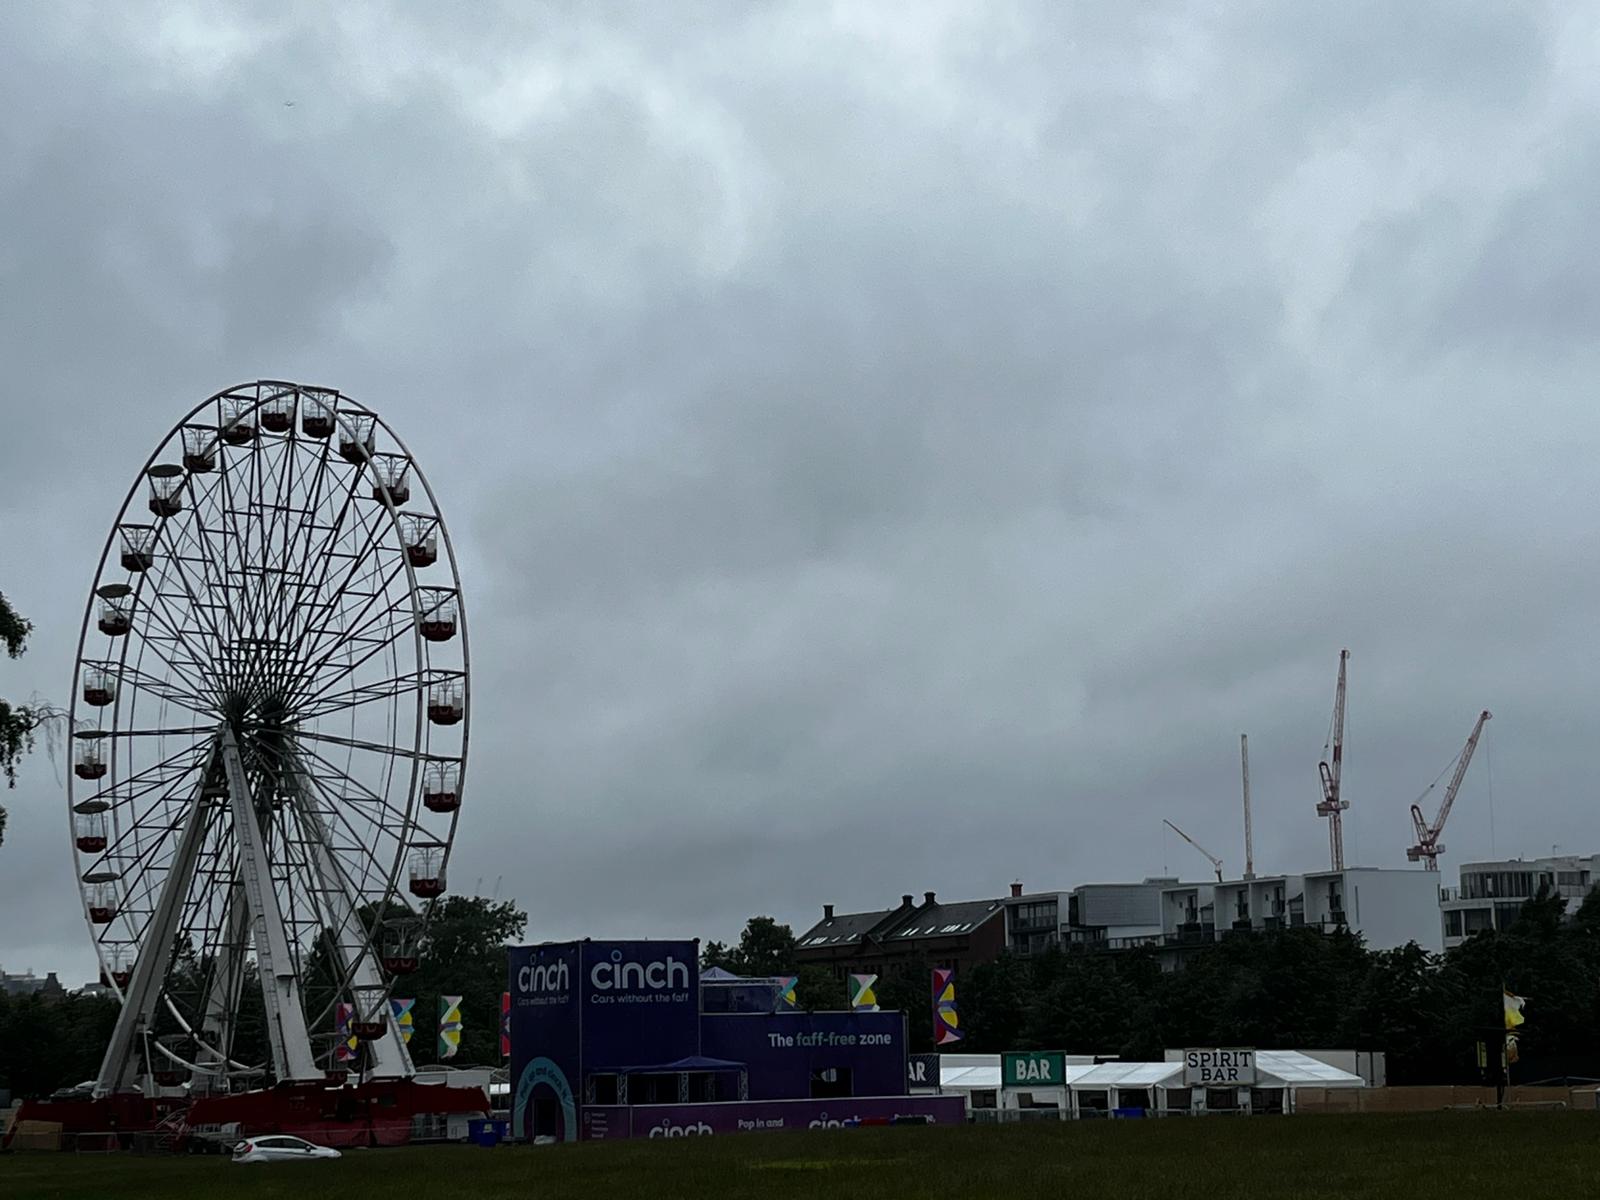 Revellers will get a pretty good view from the top of this Ferris wheel.